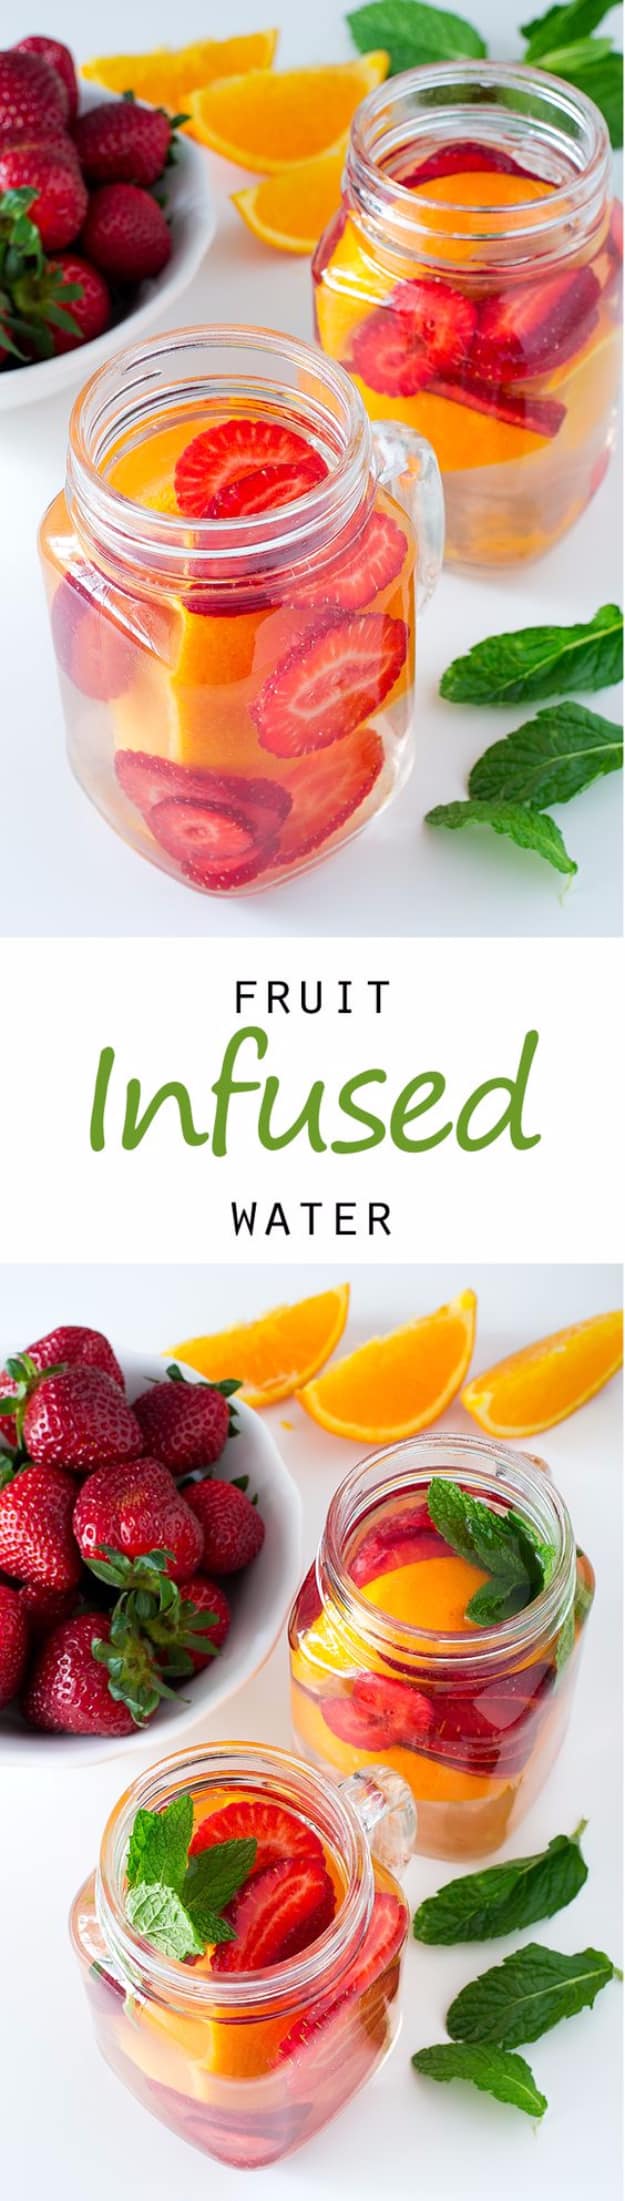 Best DIY Detox Waters and Recipes - Fruit Infused Detox Water - Homemade Detox Water Instructions and Tutorials - Lose Weight and Remove Toxins From the Body for Your New Years Resolutions - Easy and Quick Recipe Ideas for Getting Healthy in 2017 - DIY Projects and Crafts by DIY Joy 